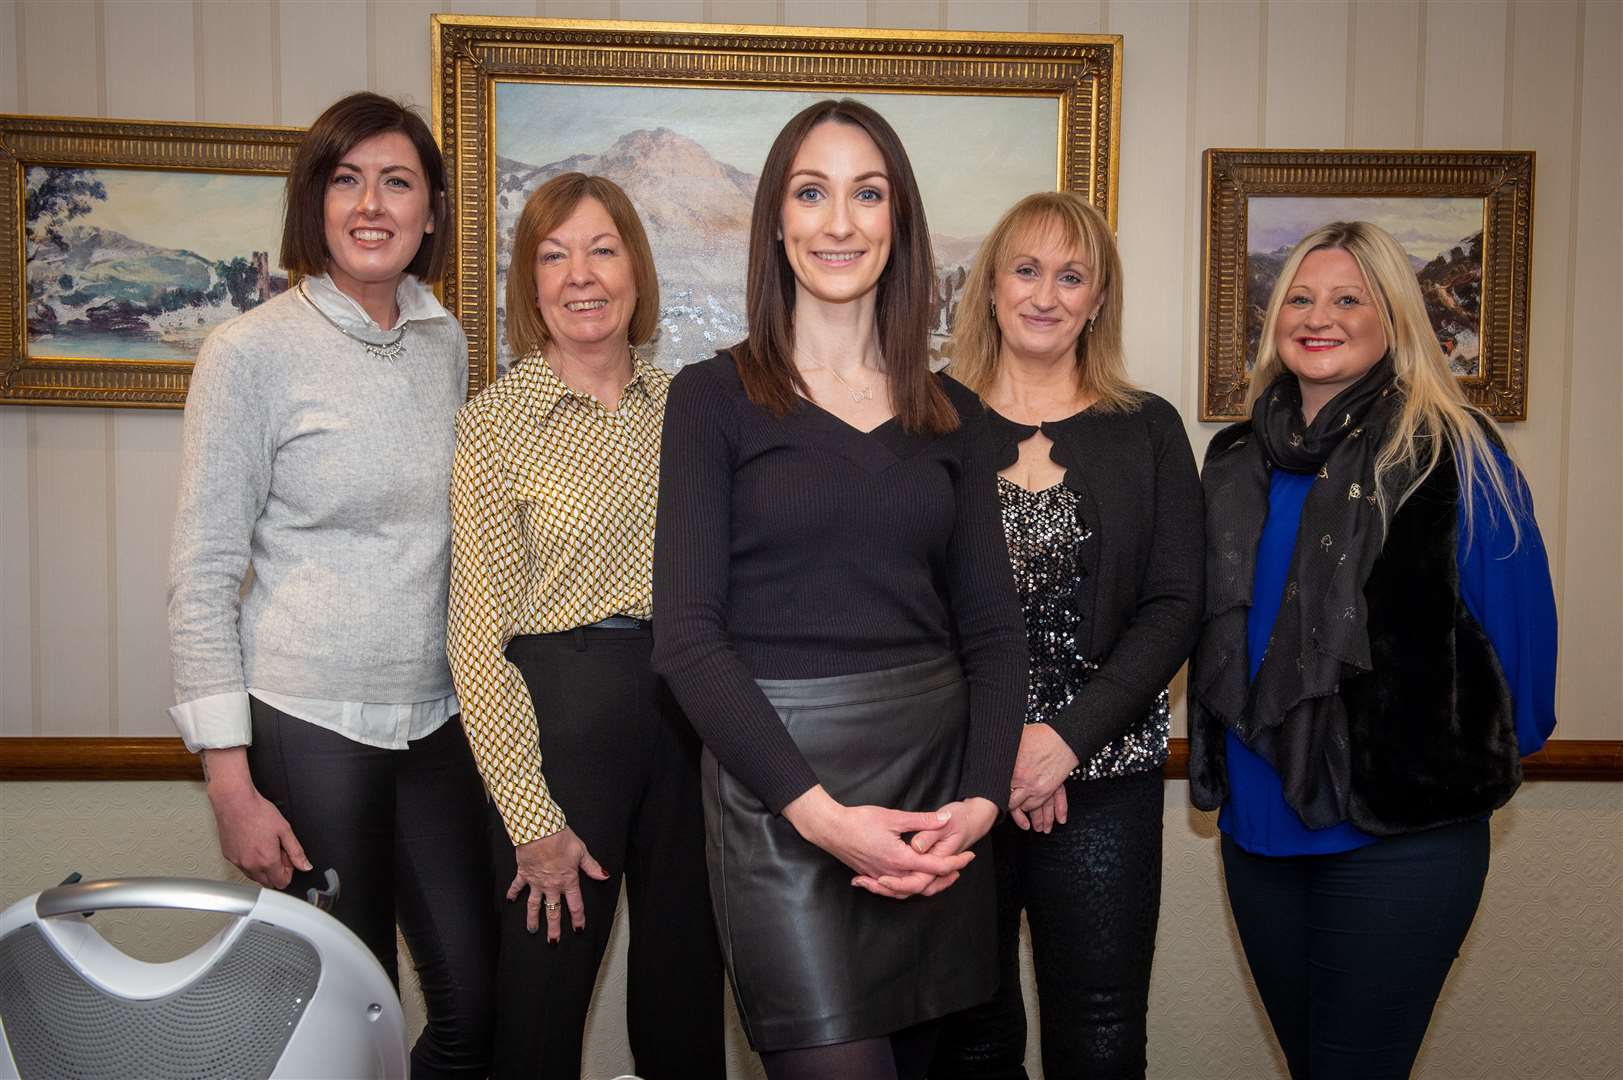 Competition winner Lindsay Dunlop, centre, at the Drumossie Hotel in Inverness with, from left, Emma Slaney, Avril Slaney, Margaret Maclean and Sinead Brydon.